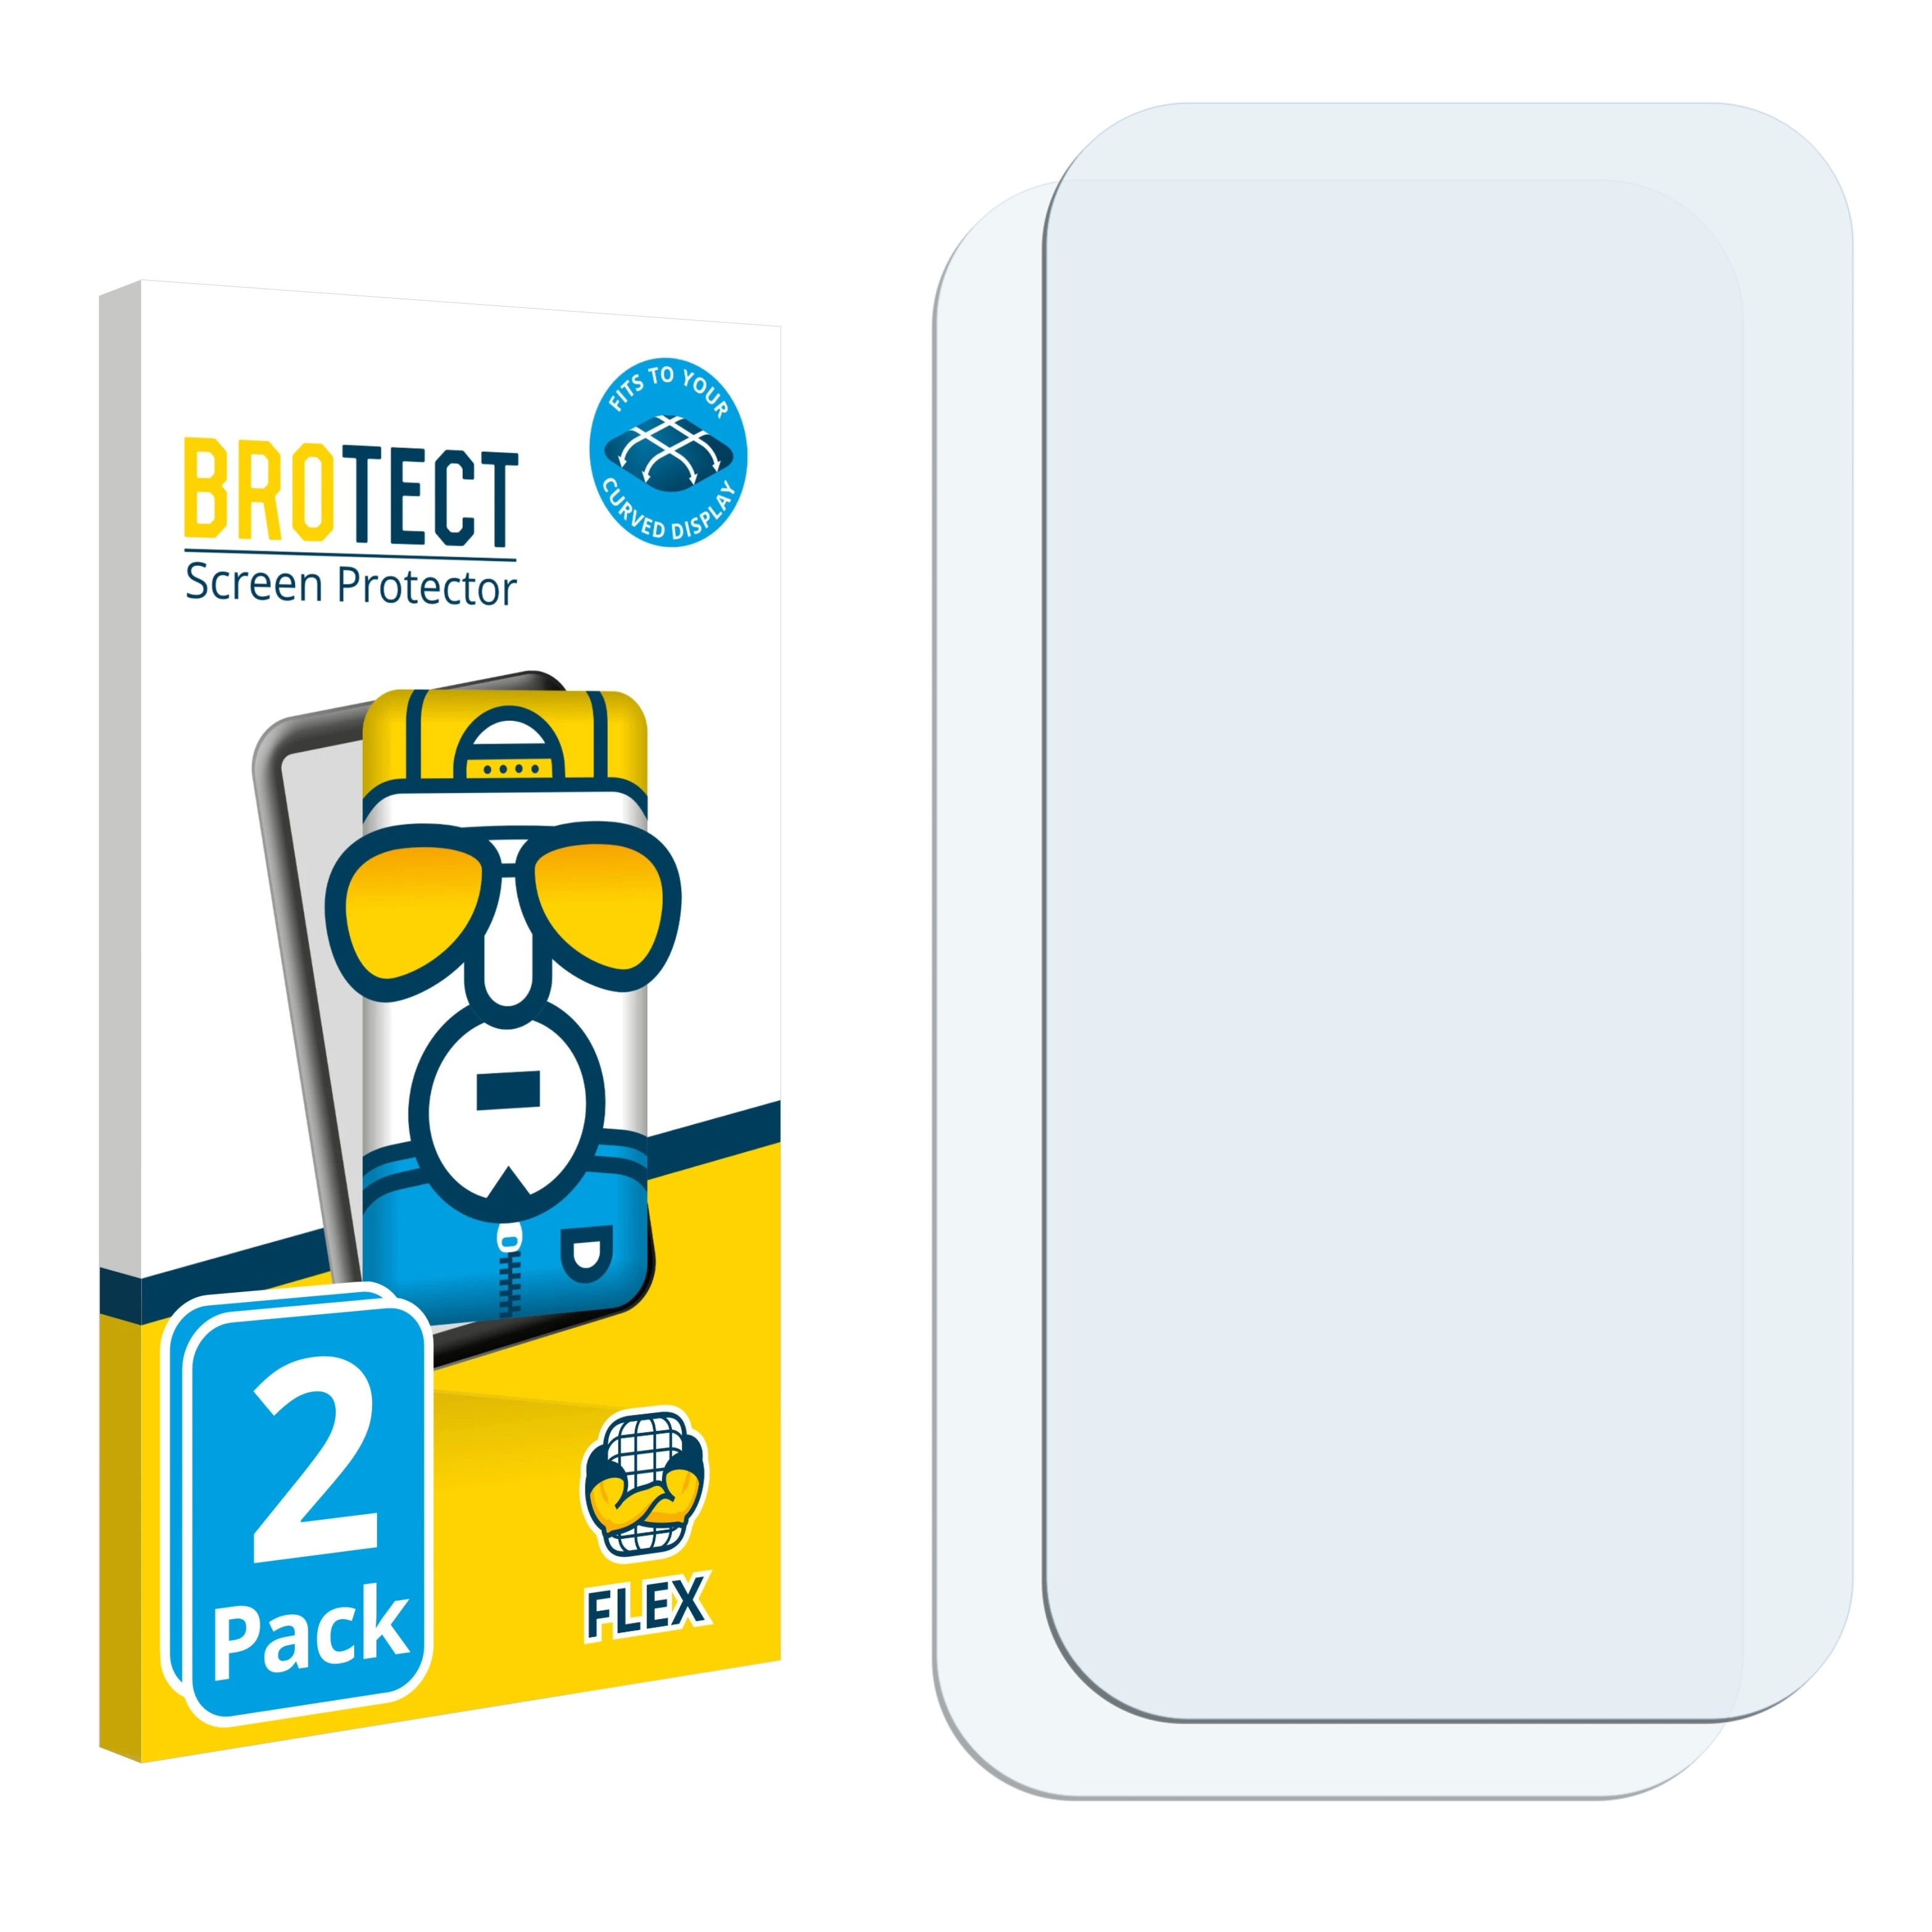 BROTECT 2x Flex MB20G) Schutzfolie(für TCL 3D Curved Moveband Full-Cover